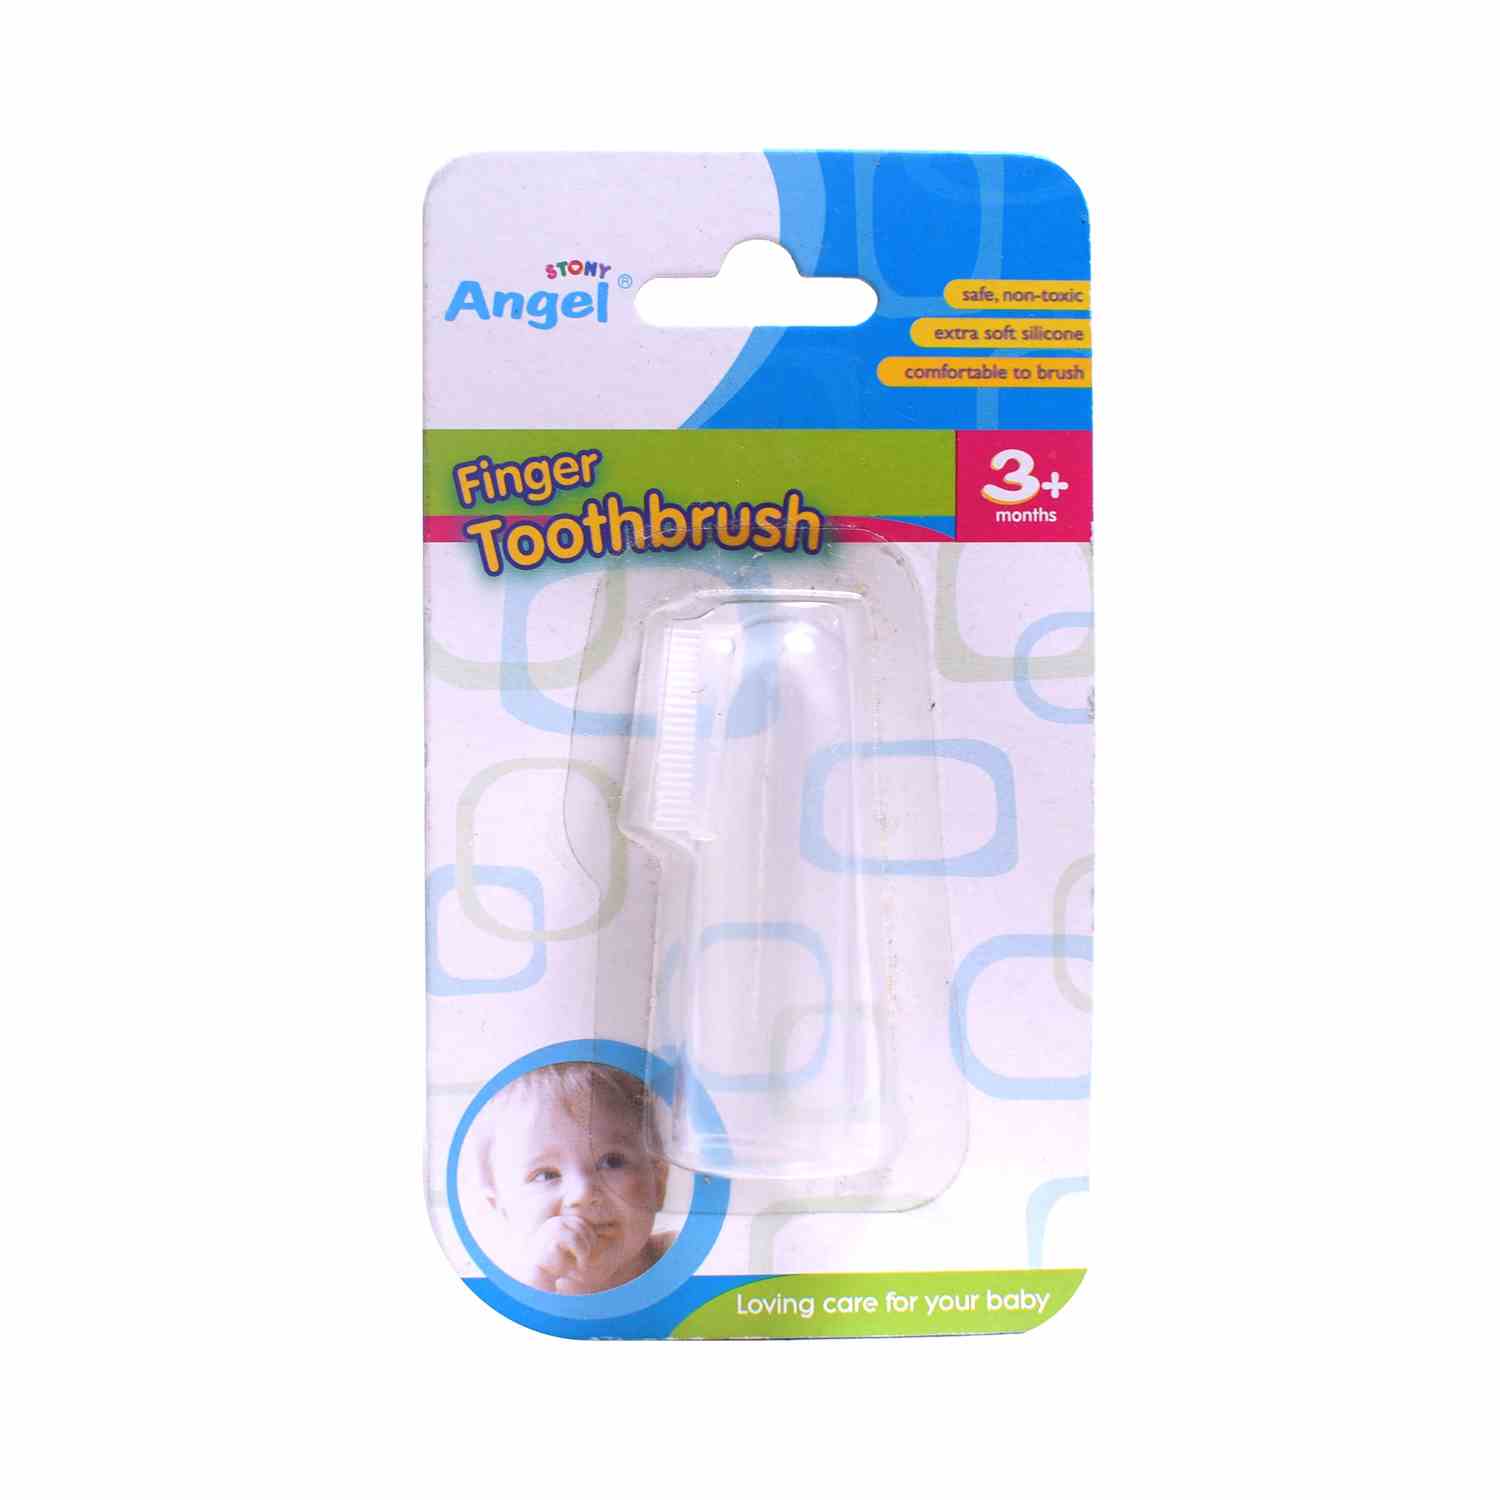 STONY ANGEL Soft Silicone Baby Finger Toothbrush, 3+m Age